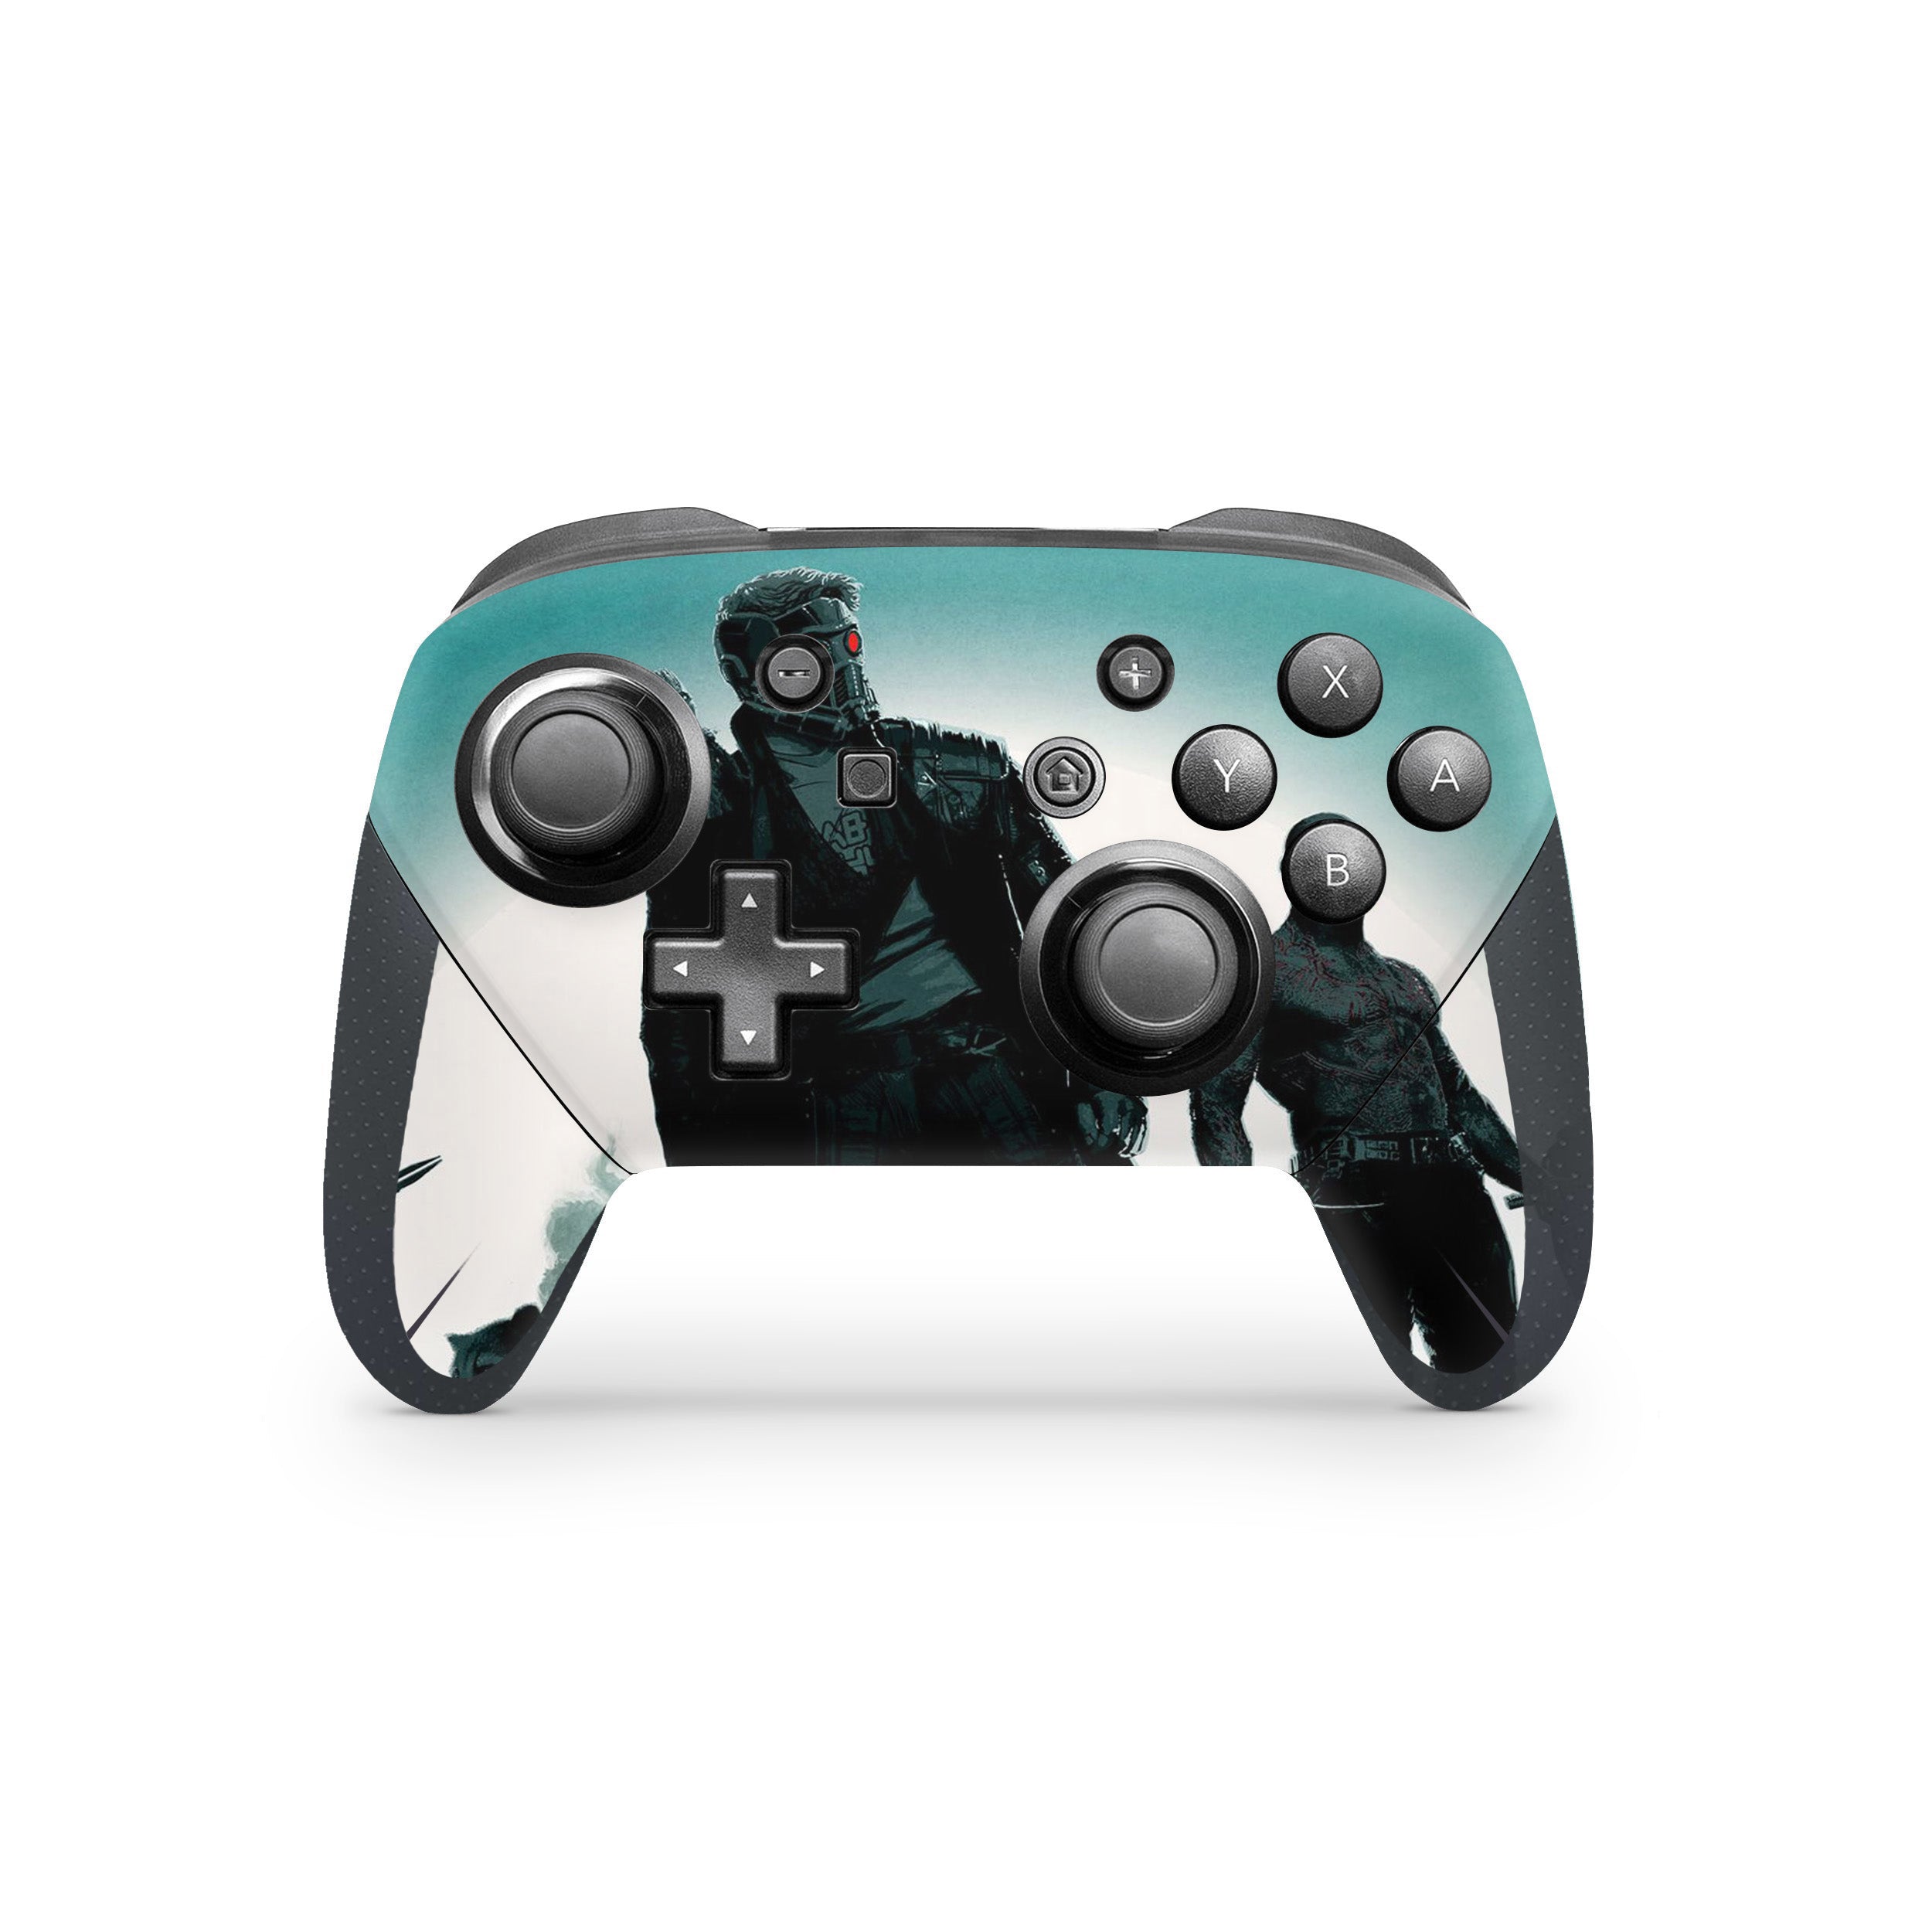 A video game skin featuring a Marvel Guardians of the Galaxy design for the Switch Pro Controller.